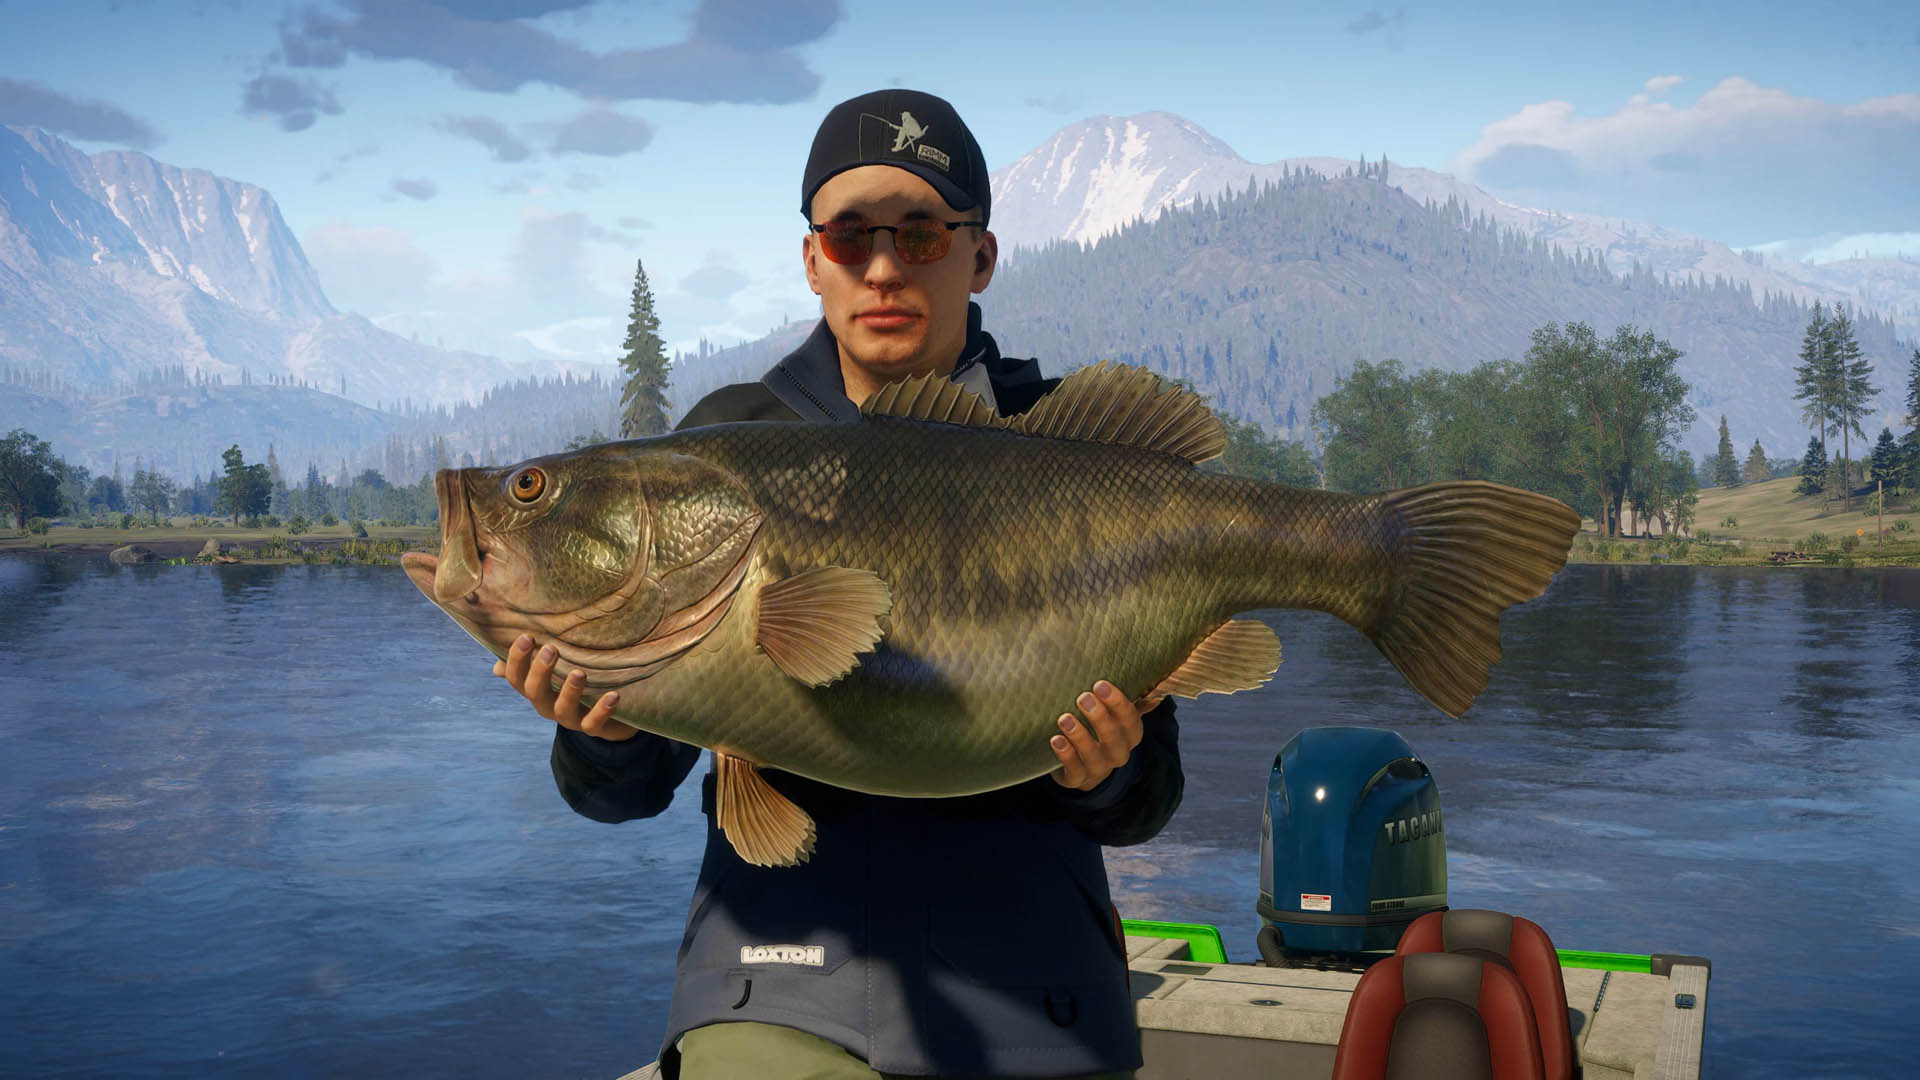 Call Of The Wild: The Angler Review: Fish And Beer, 40% OFF